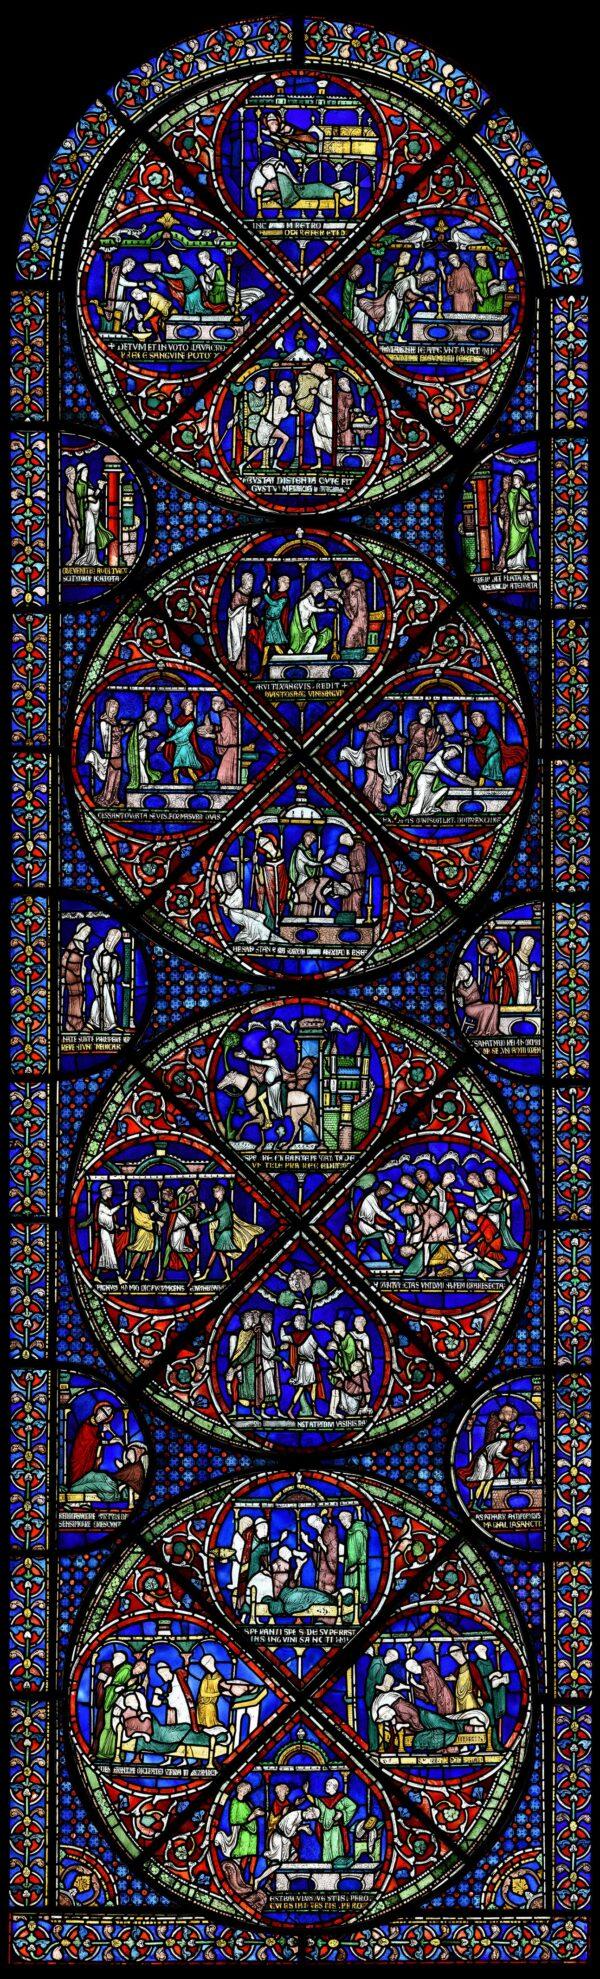 In the early 1200s, 12 stained glass windows, about 30-feet tall, were made to depict the events of Thomas Becket’s life and death, including miracles attributed to him. The series of windows, called the “miracle windows,” surround where Becket’s now-lost shrine was once placed. This particular window shows how Becket helped ordinary people. (The Chapter, Canterbury Cathedral)